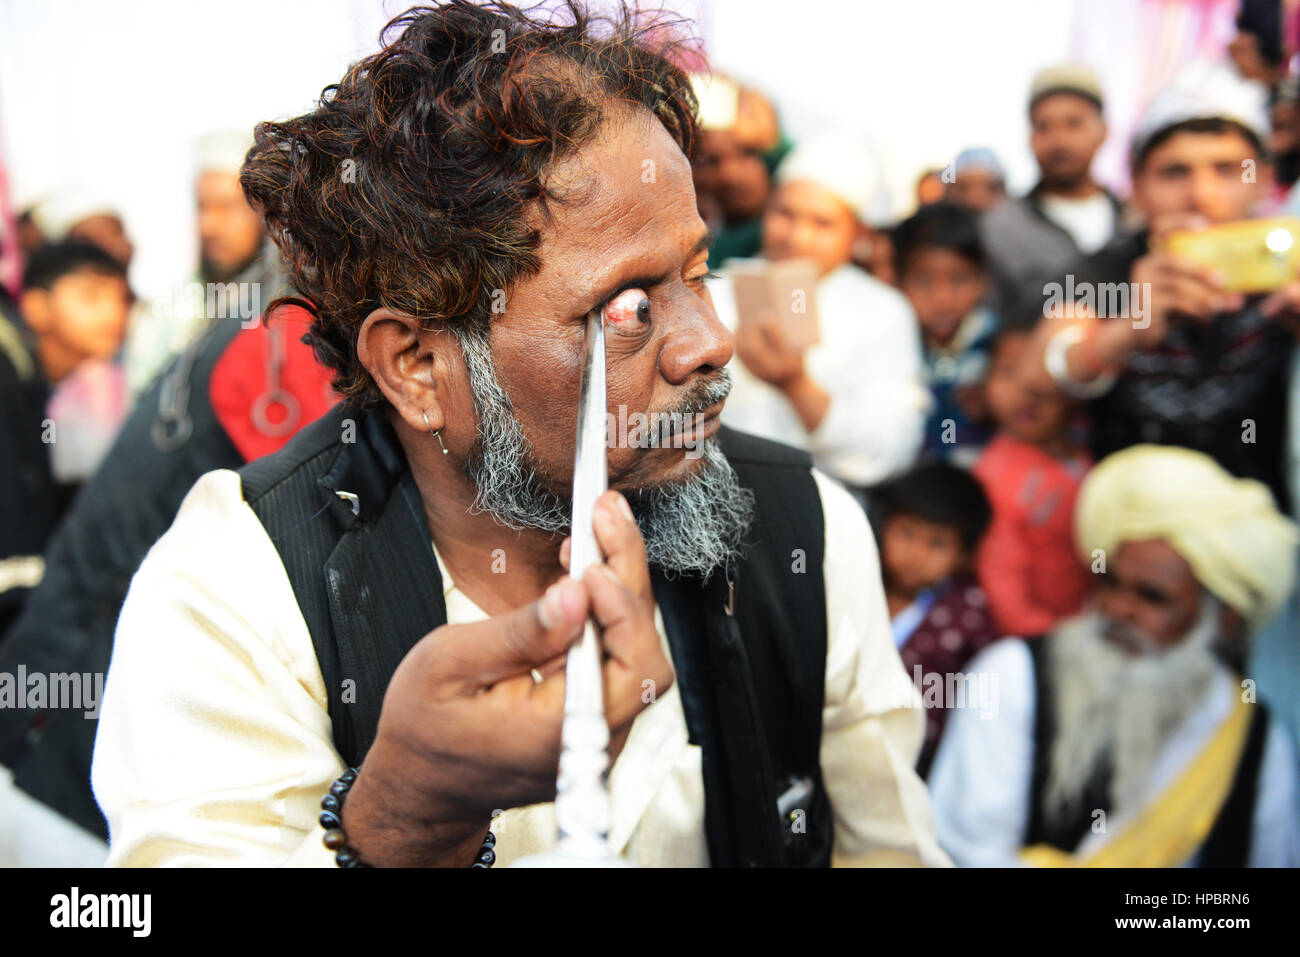 Sufi self-mortification practices at the annual 'Urs (death anniversary) of the Sufi saint Zinda Shah in Makanpur, Uttar Pradesh, India. Stock Photo